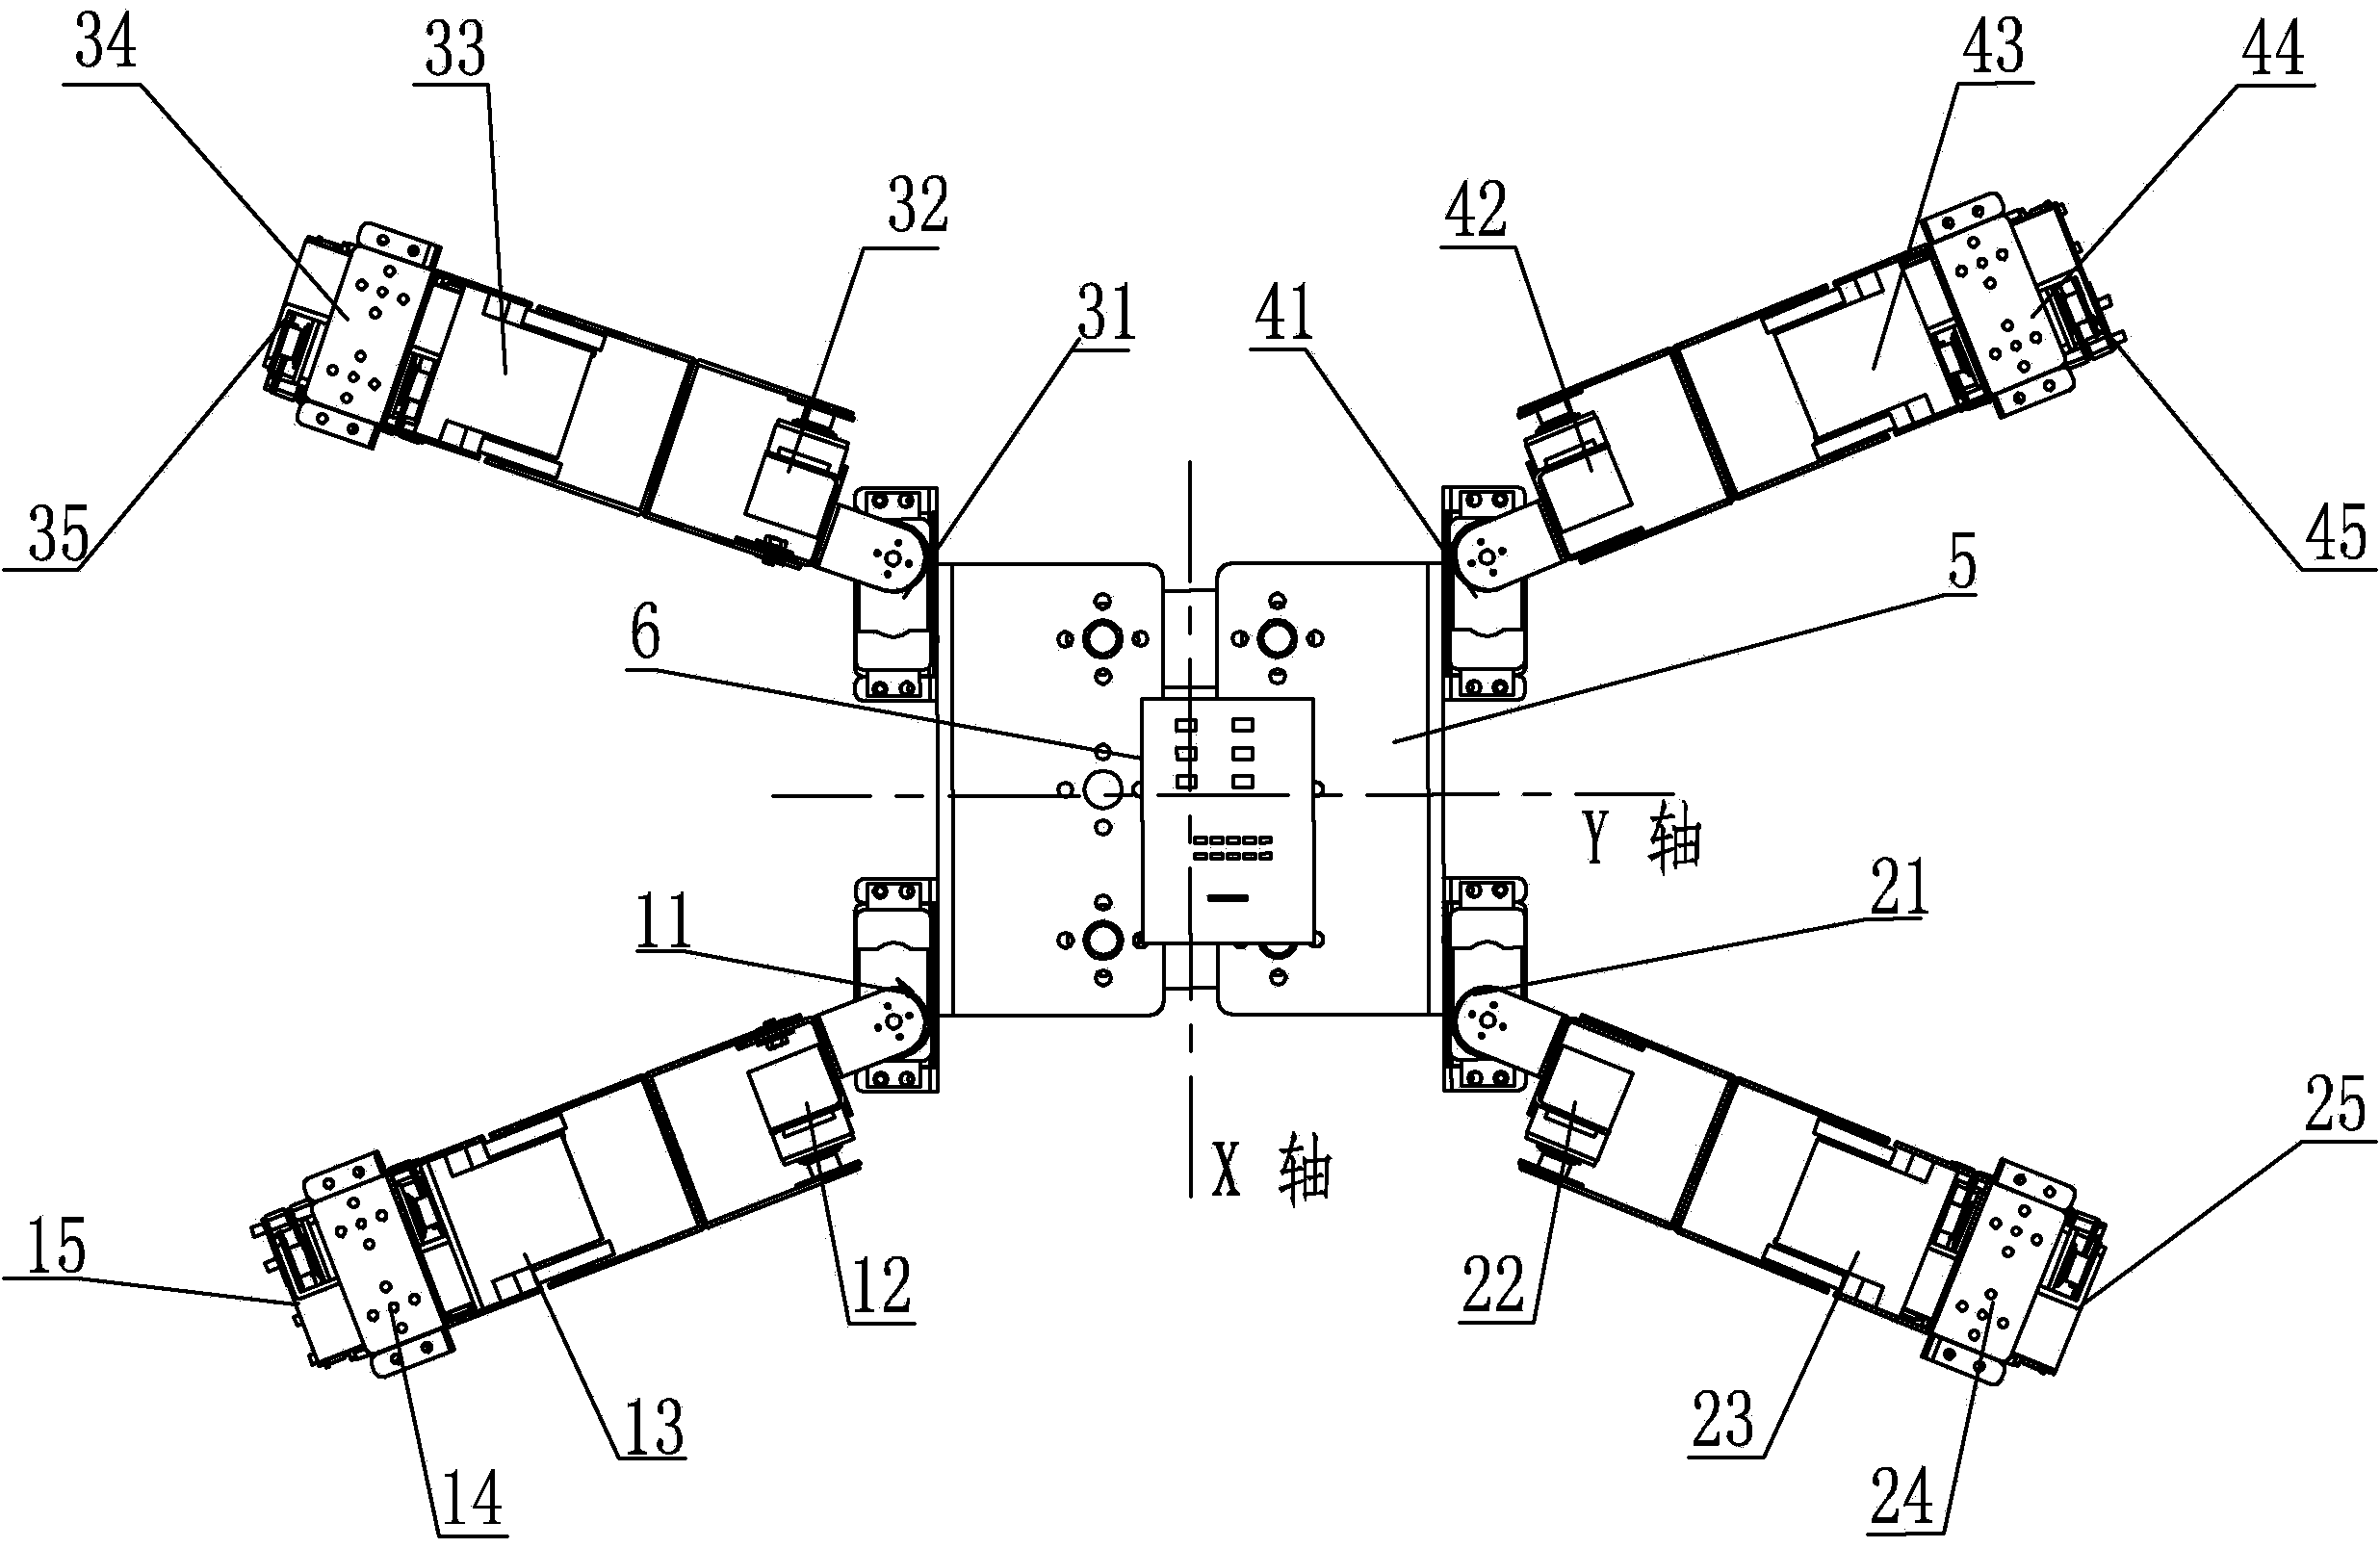 Toe-supporting type quadruped robot with climbing, grabbing and excavating functions